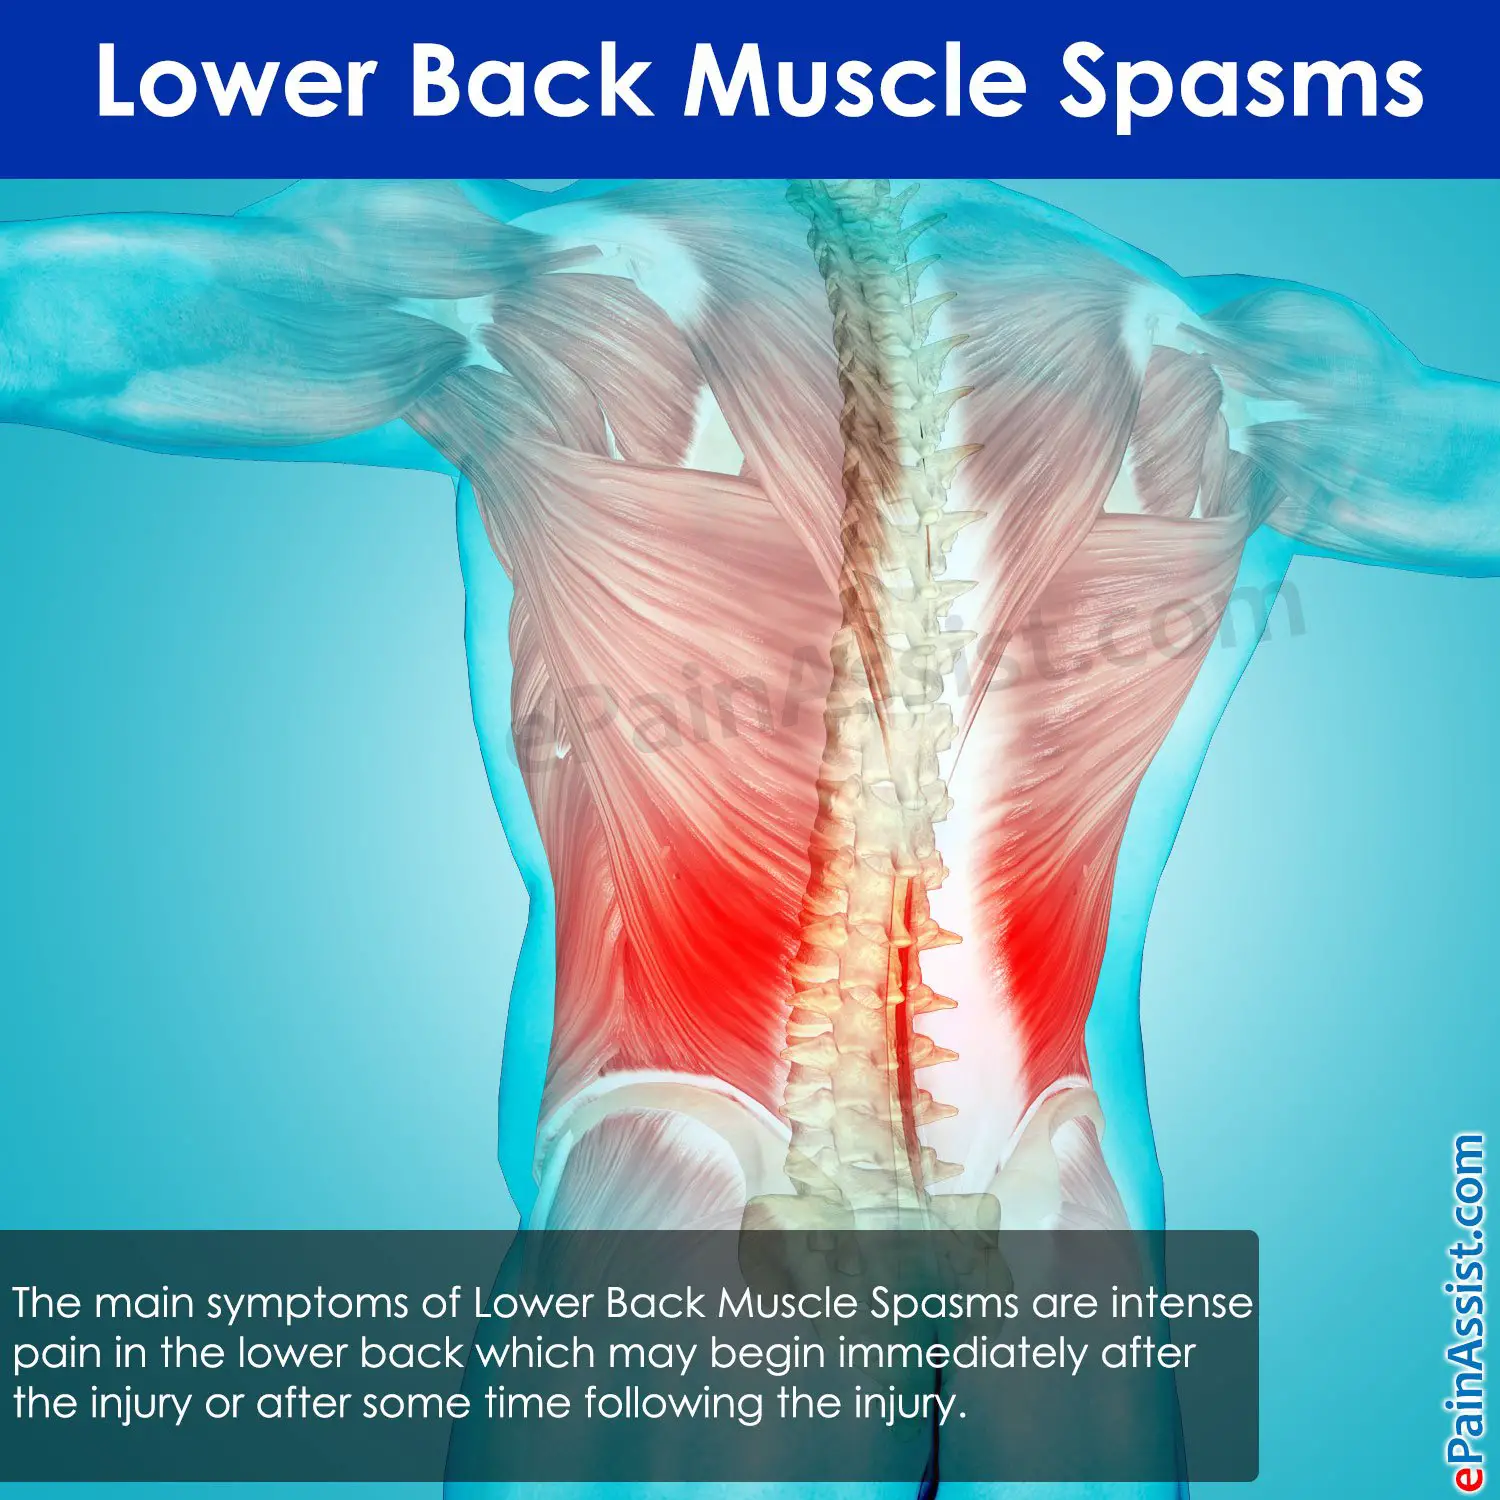 Lower Back Muscle Spasms: Treatment, Causes, Symptoms